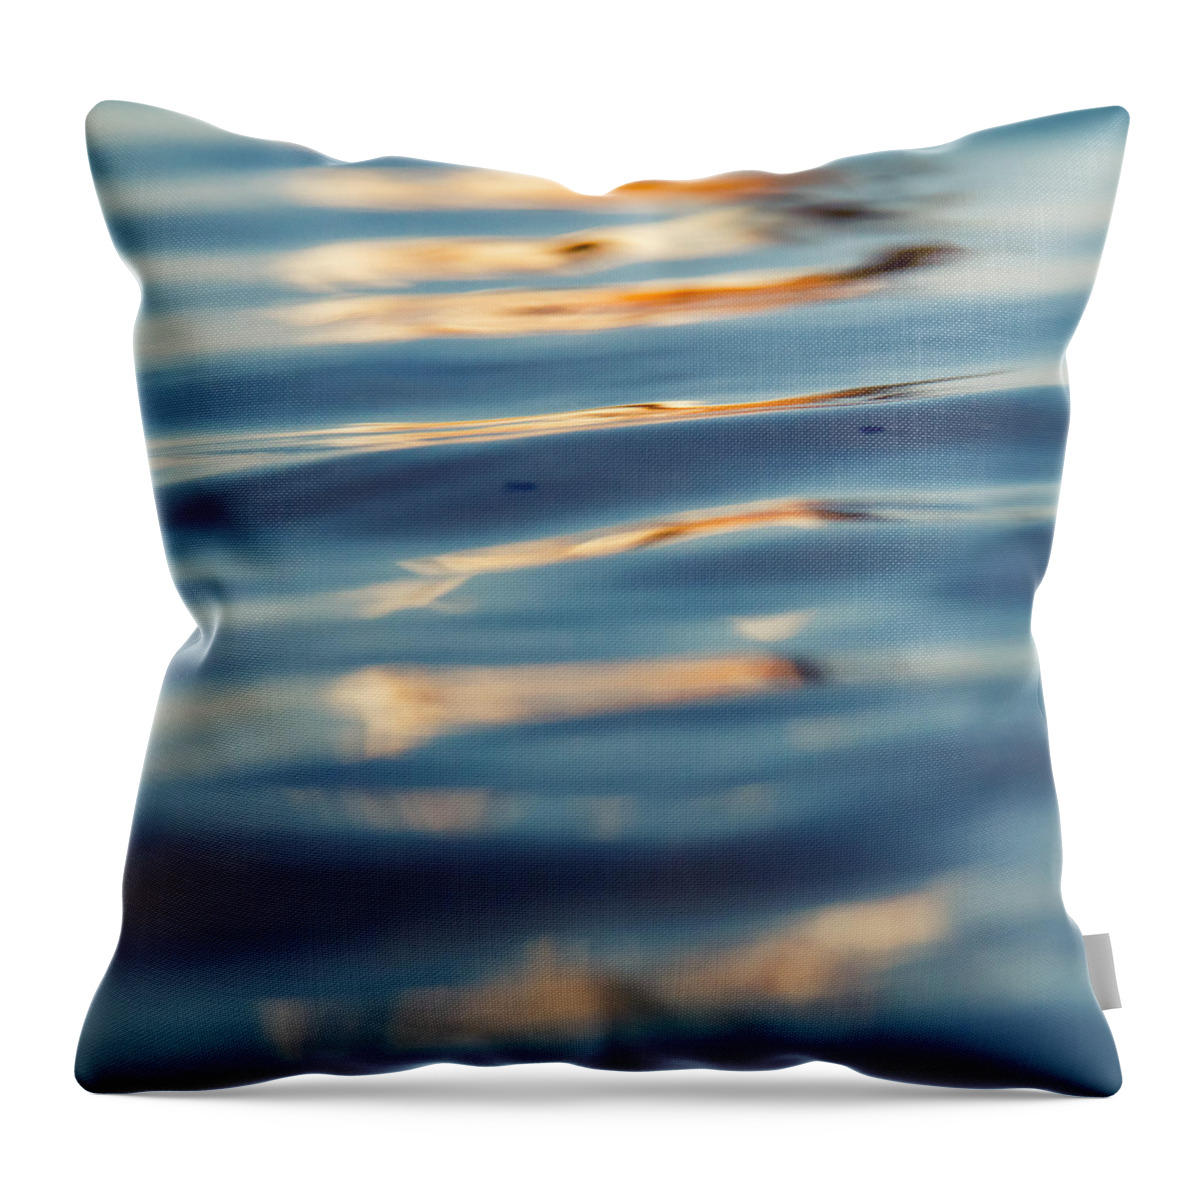 Ocean Throw Pillow featuring the photograph Sea Reflection 3 by Stelios Kleanthous